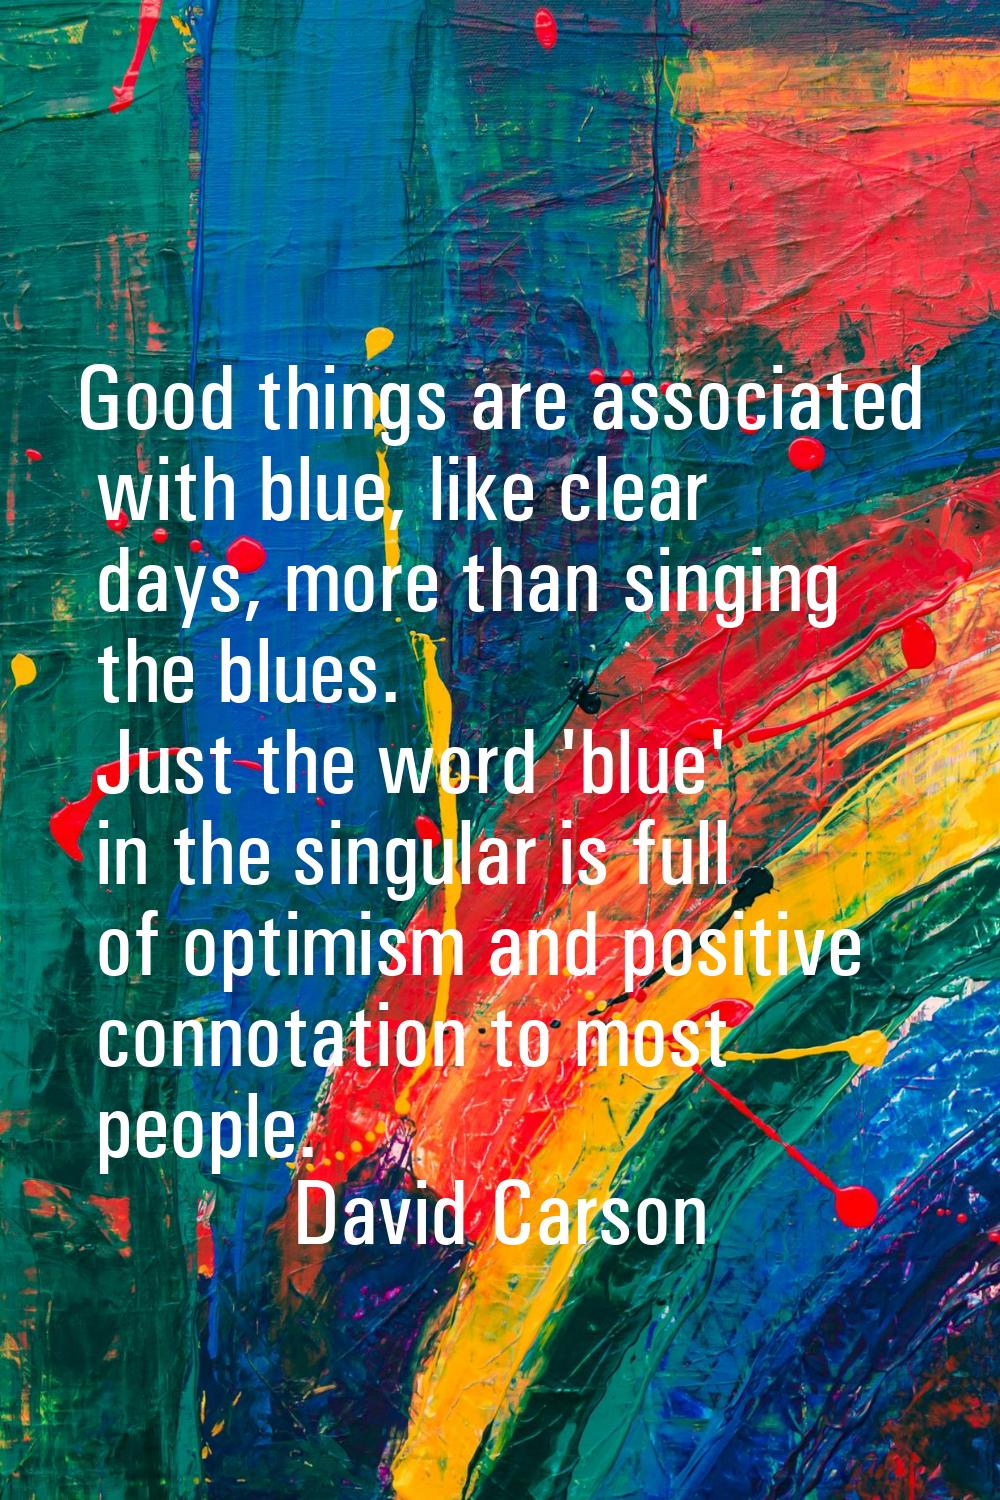 Good things are associated with blue, like clear days, more than singing the blues. Just the word '